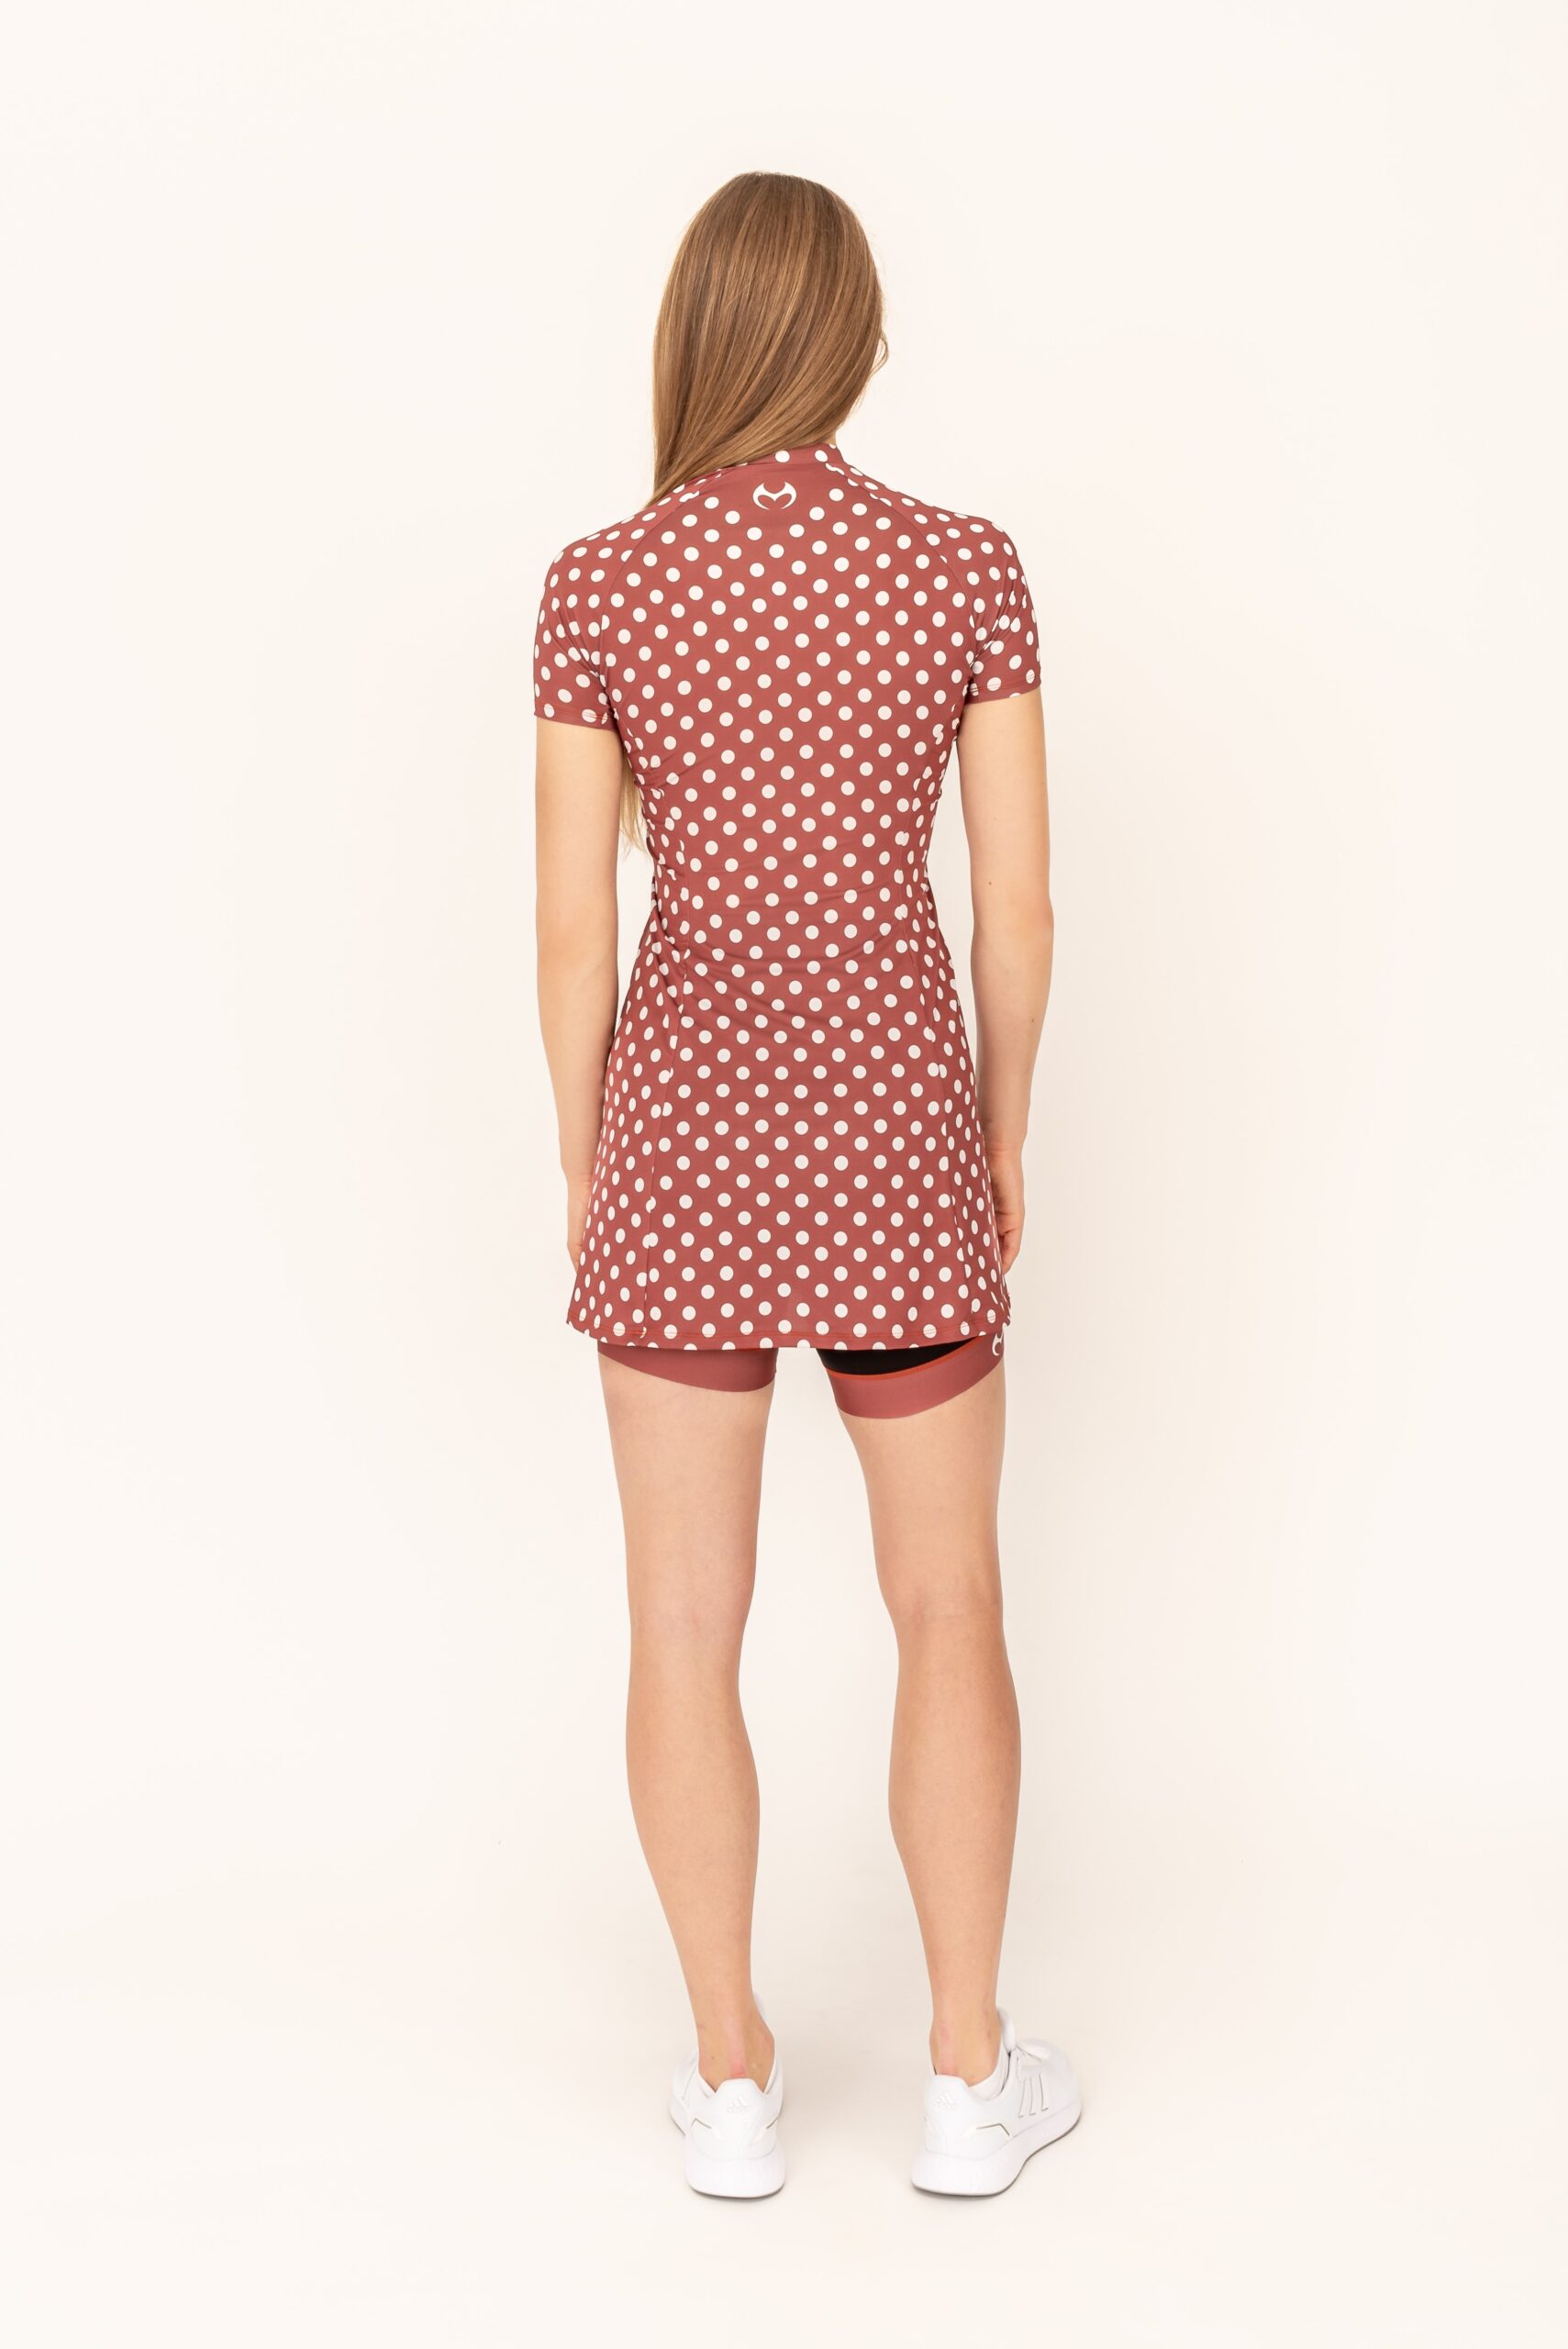 Brown sports dress with white polka dots for exercise and cycling.